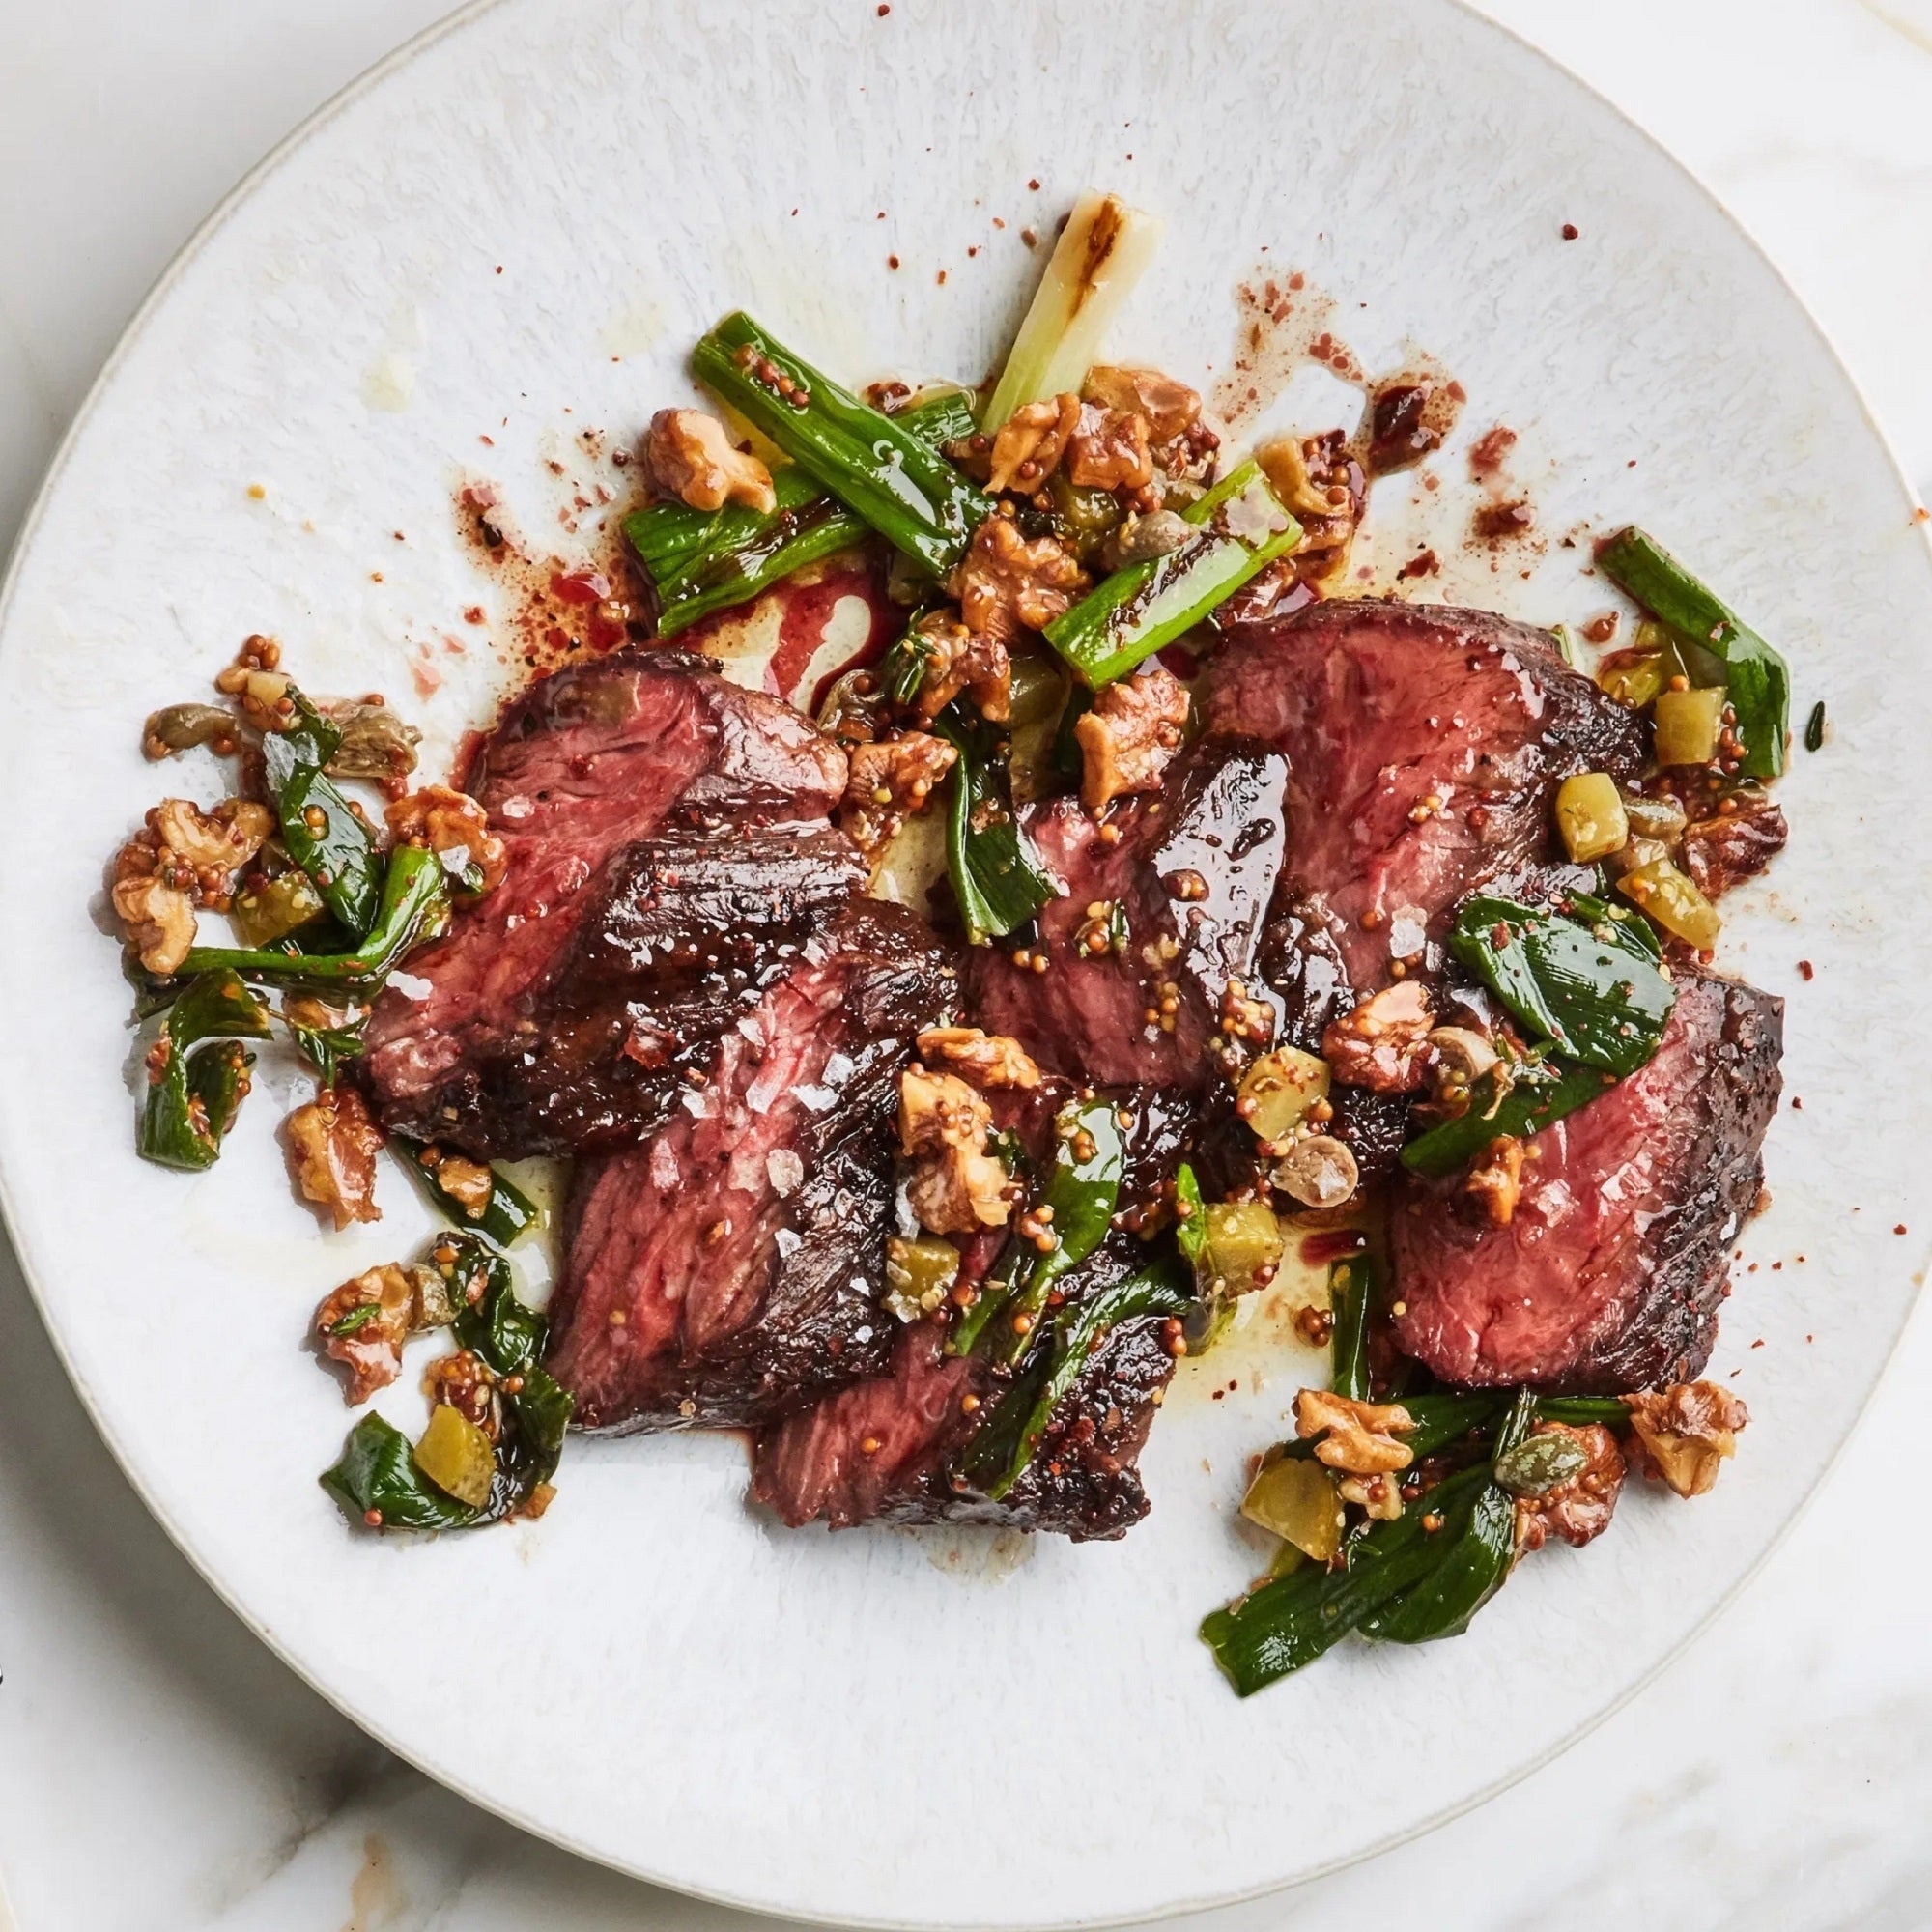 CHARRED STEAK WITH SCALLION AND TOASTED WALNUTS